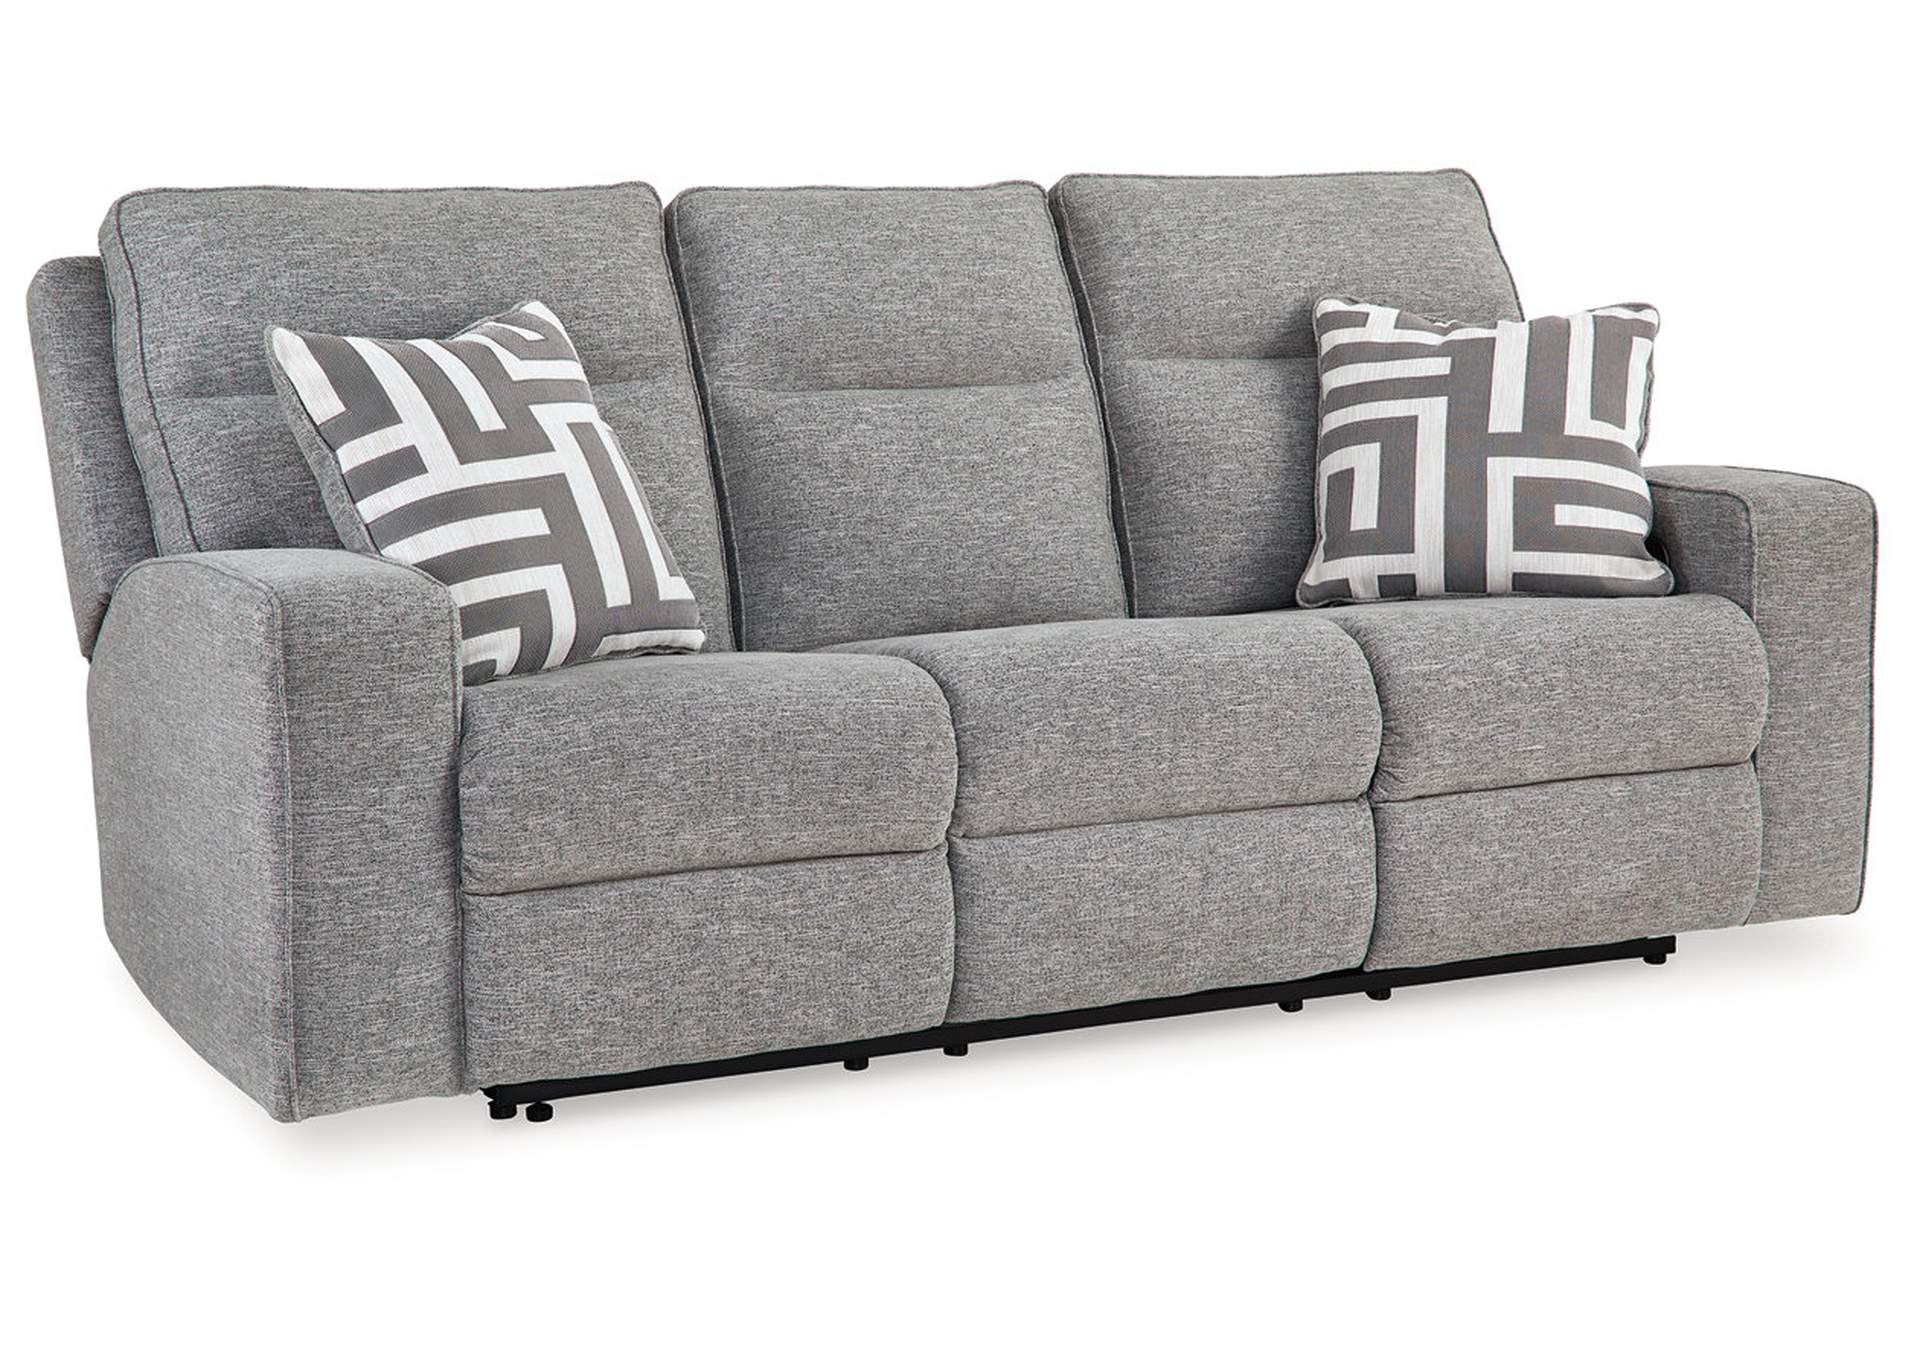 Biscoe Power Reclining Sofa,Signature Design By Ashley